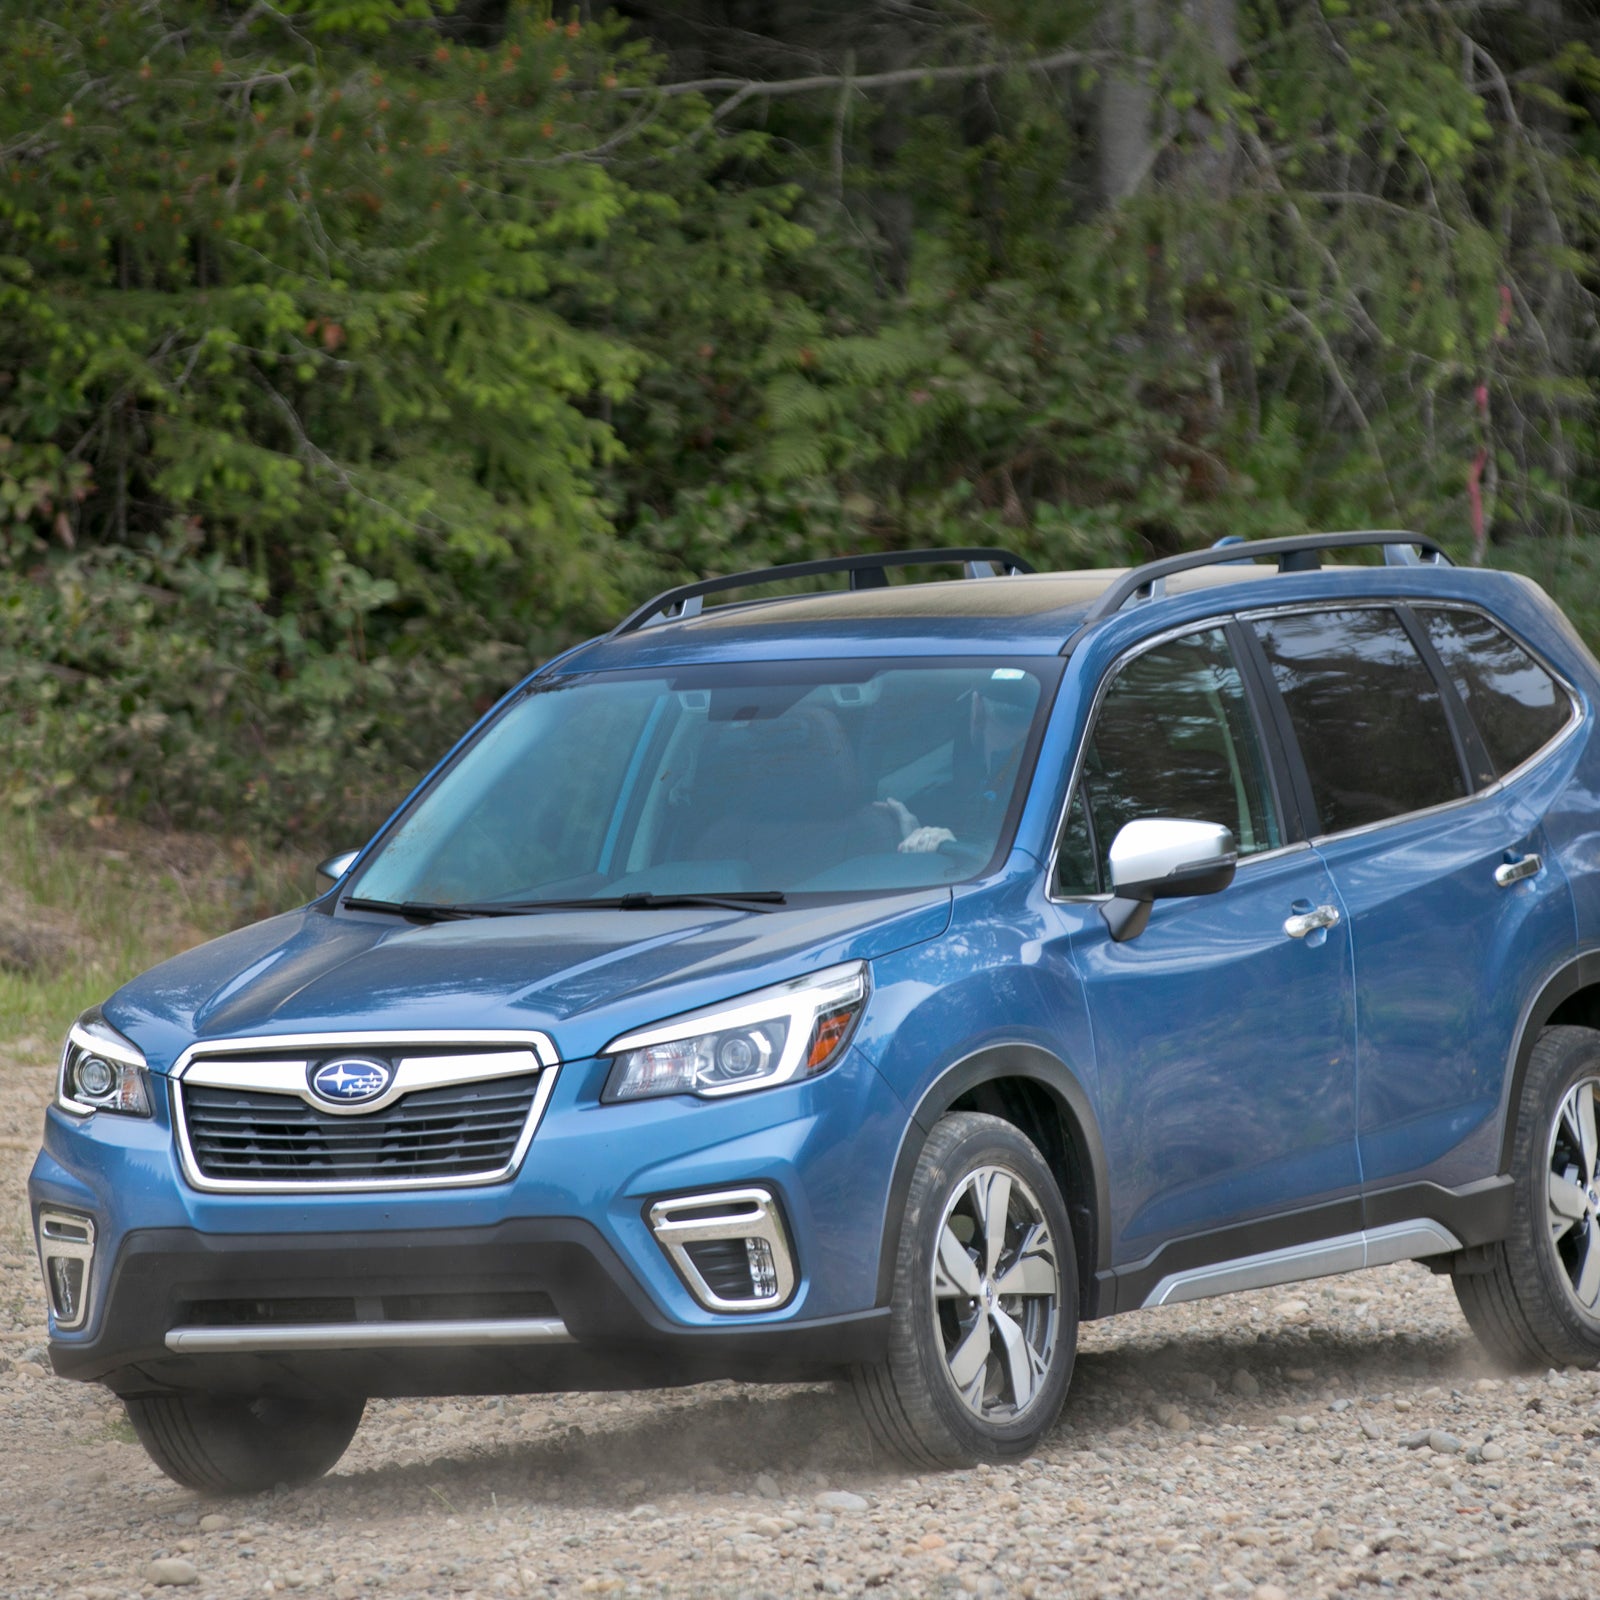 An OffRoad Review of the Subaru Forester Touring